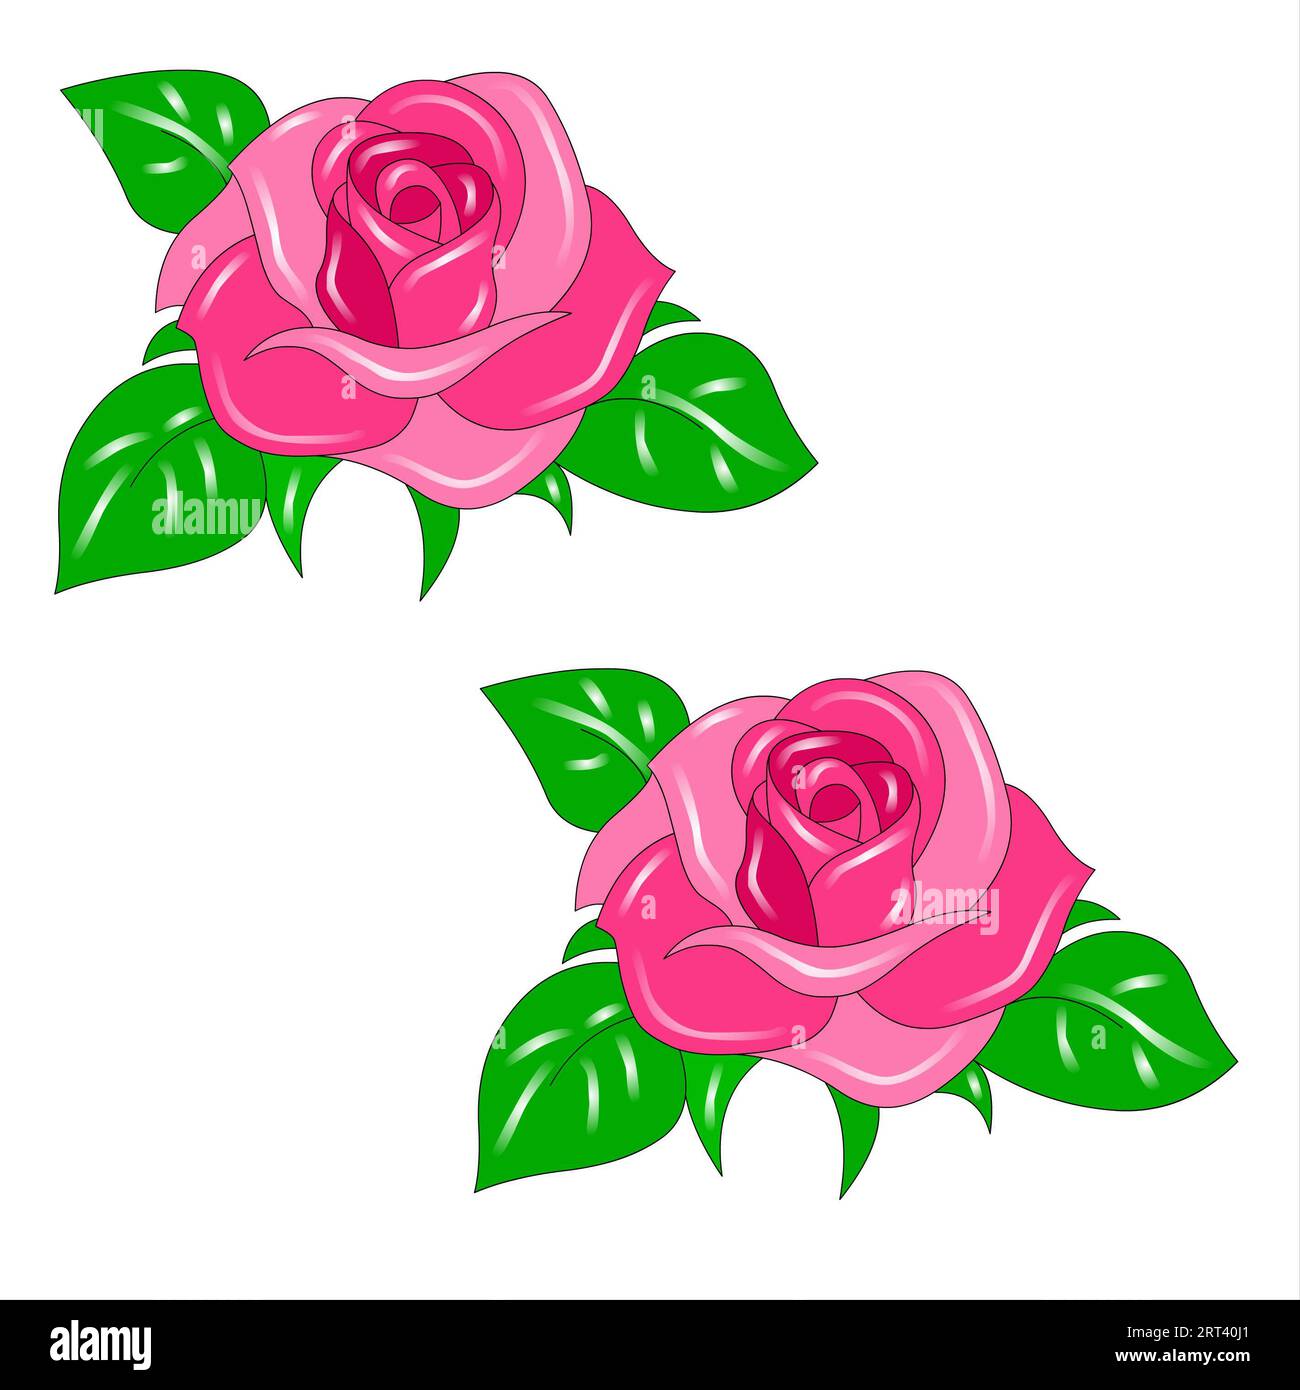 Pink rose with green leaves on a white background. Vector illustration. Stock Photo